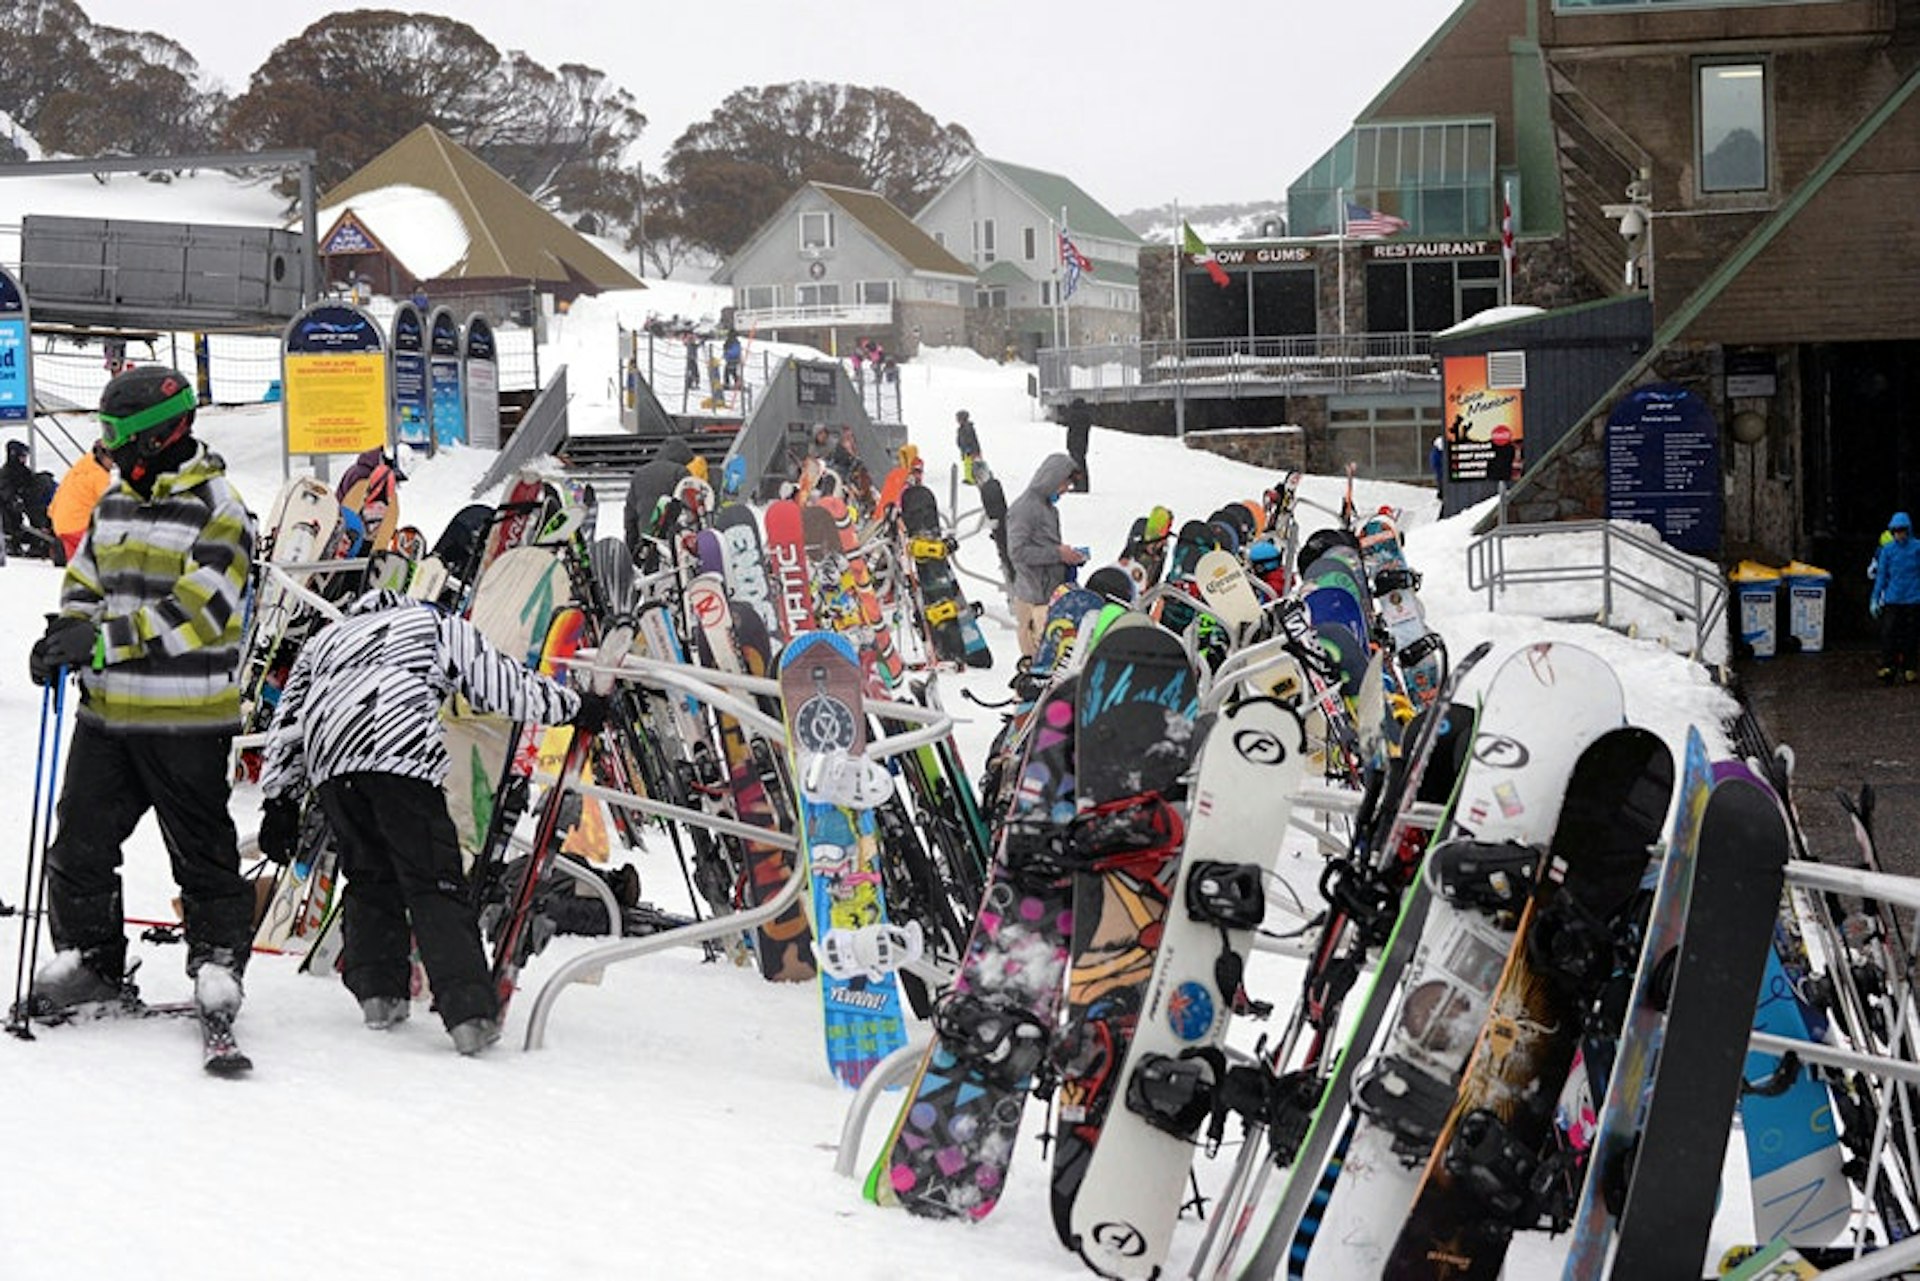 Snowboarders and skiers post their skis and snowboards on railings outside a snow resort in Australia. 